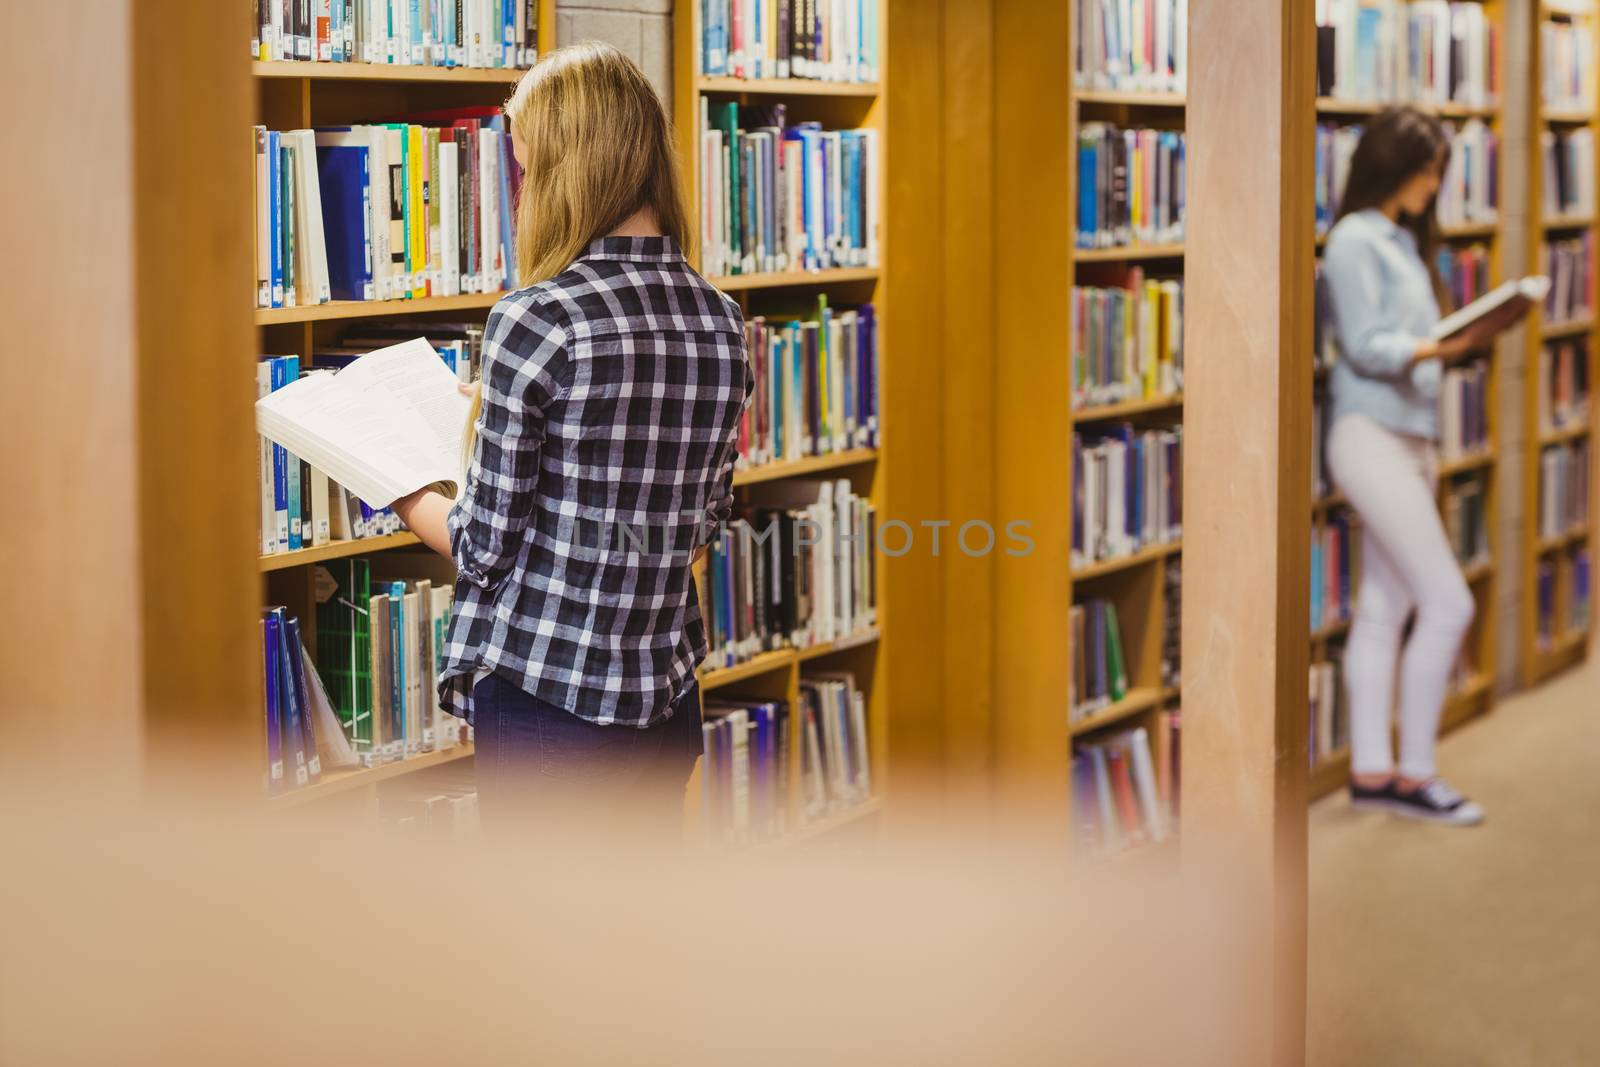 Serious students reading next to bookshelf in library